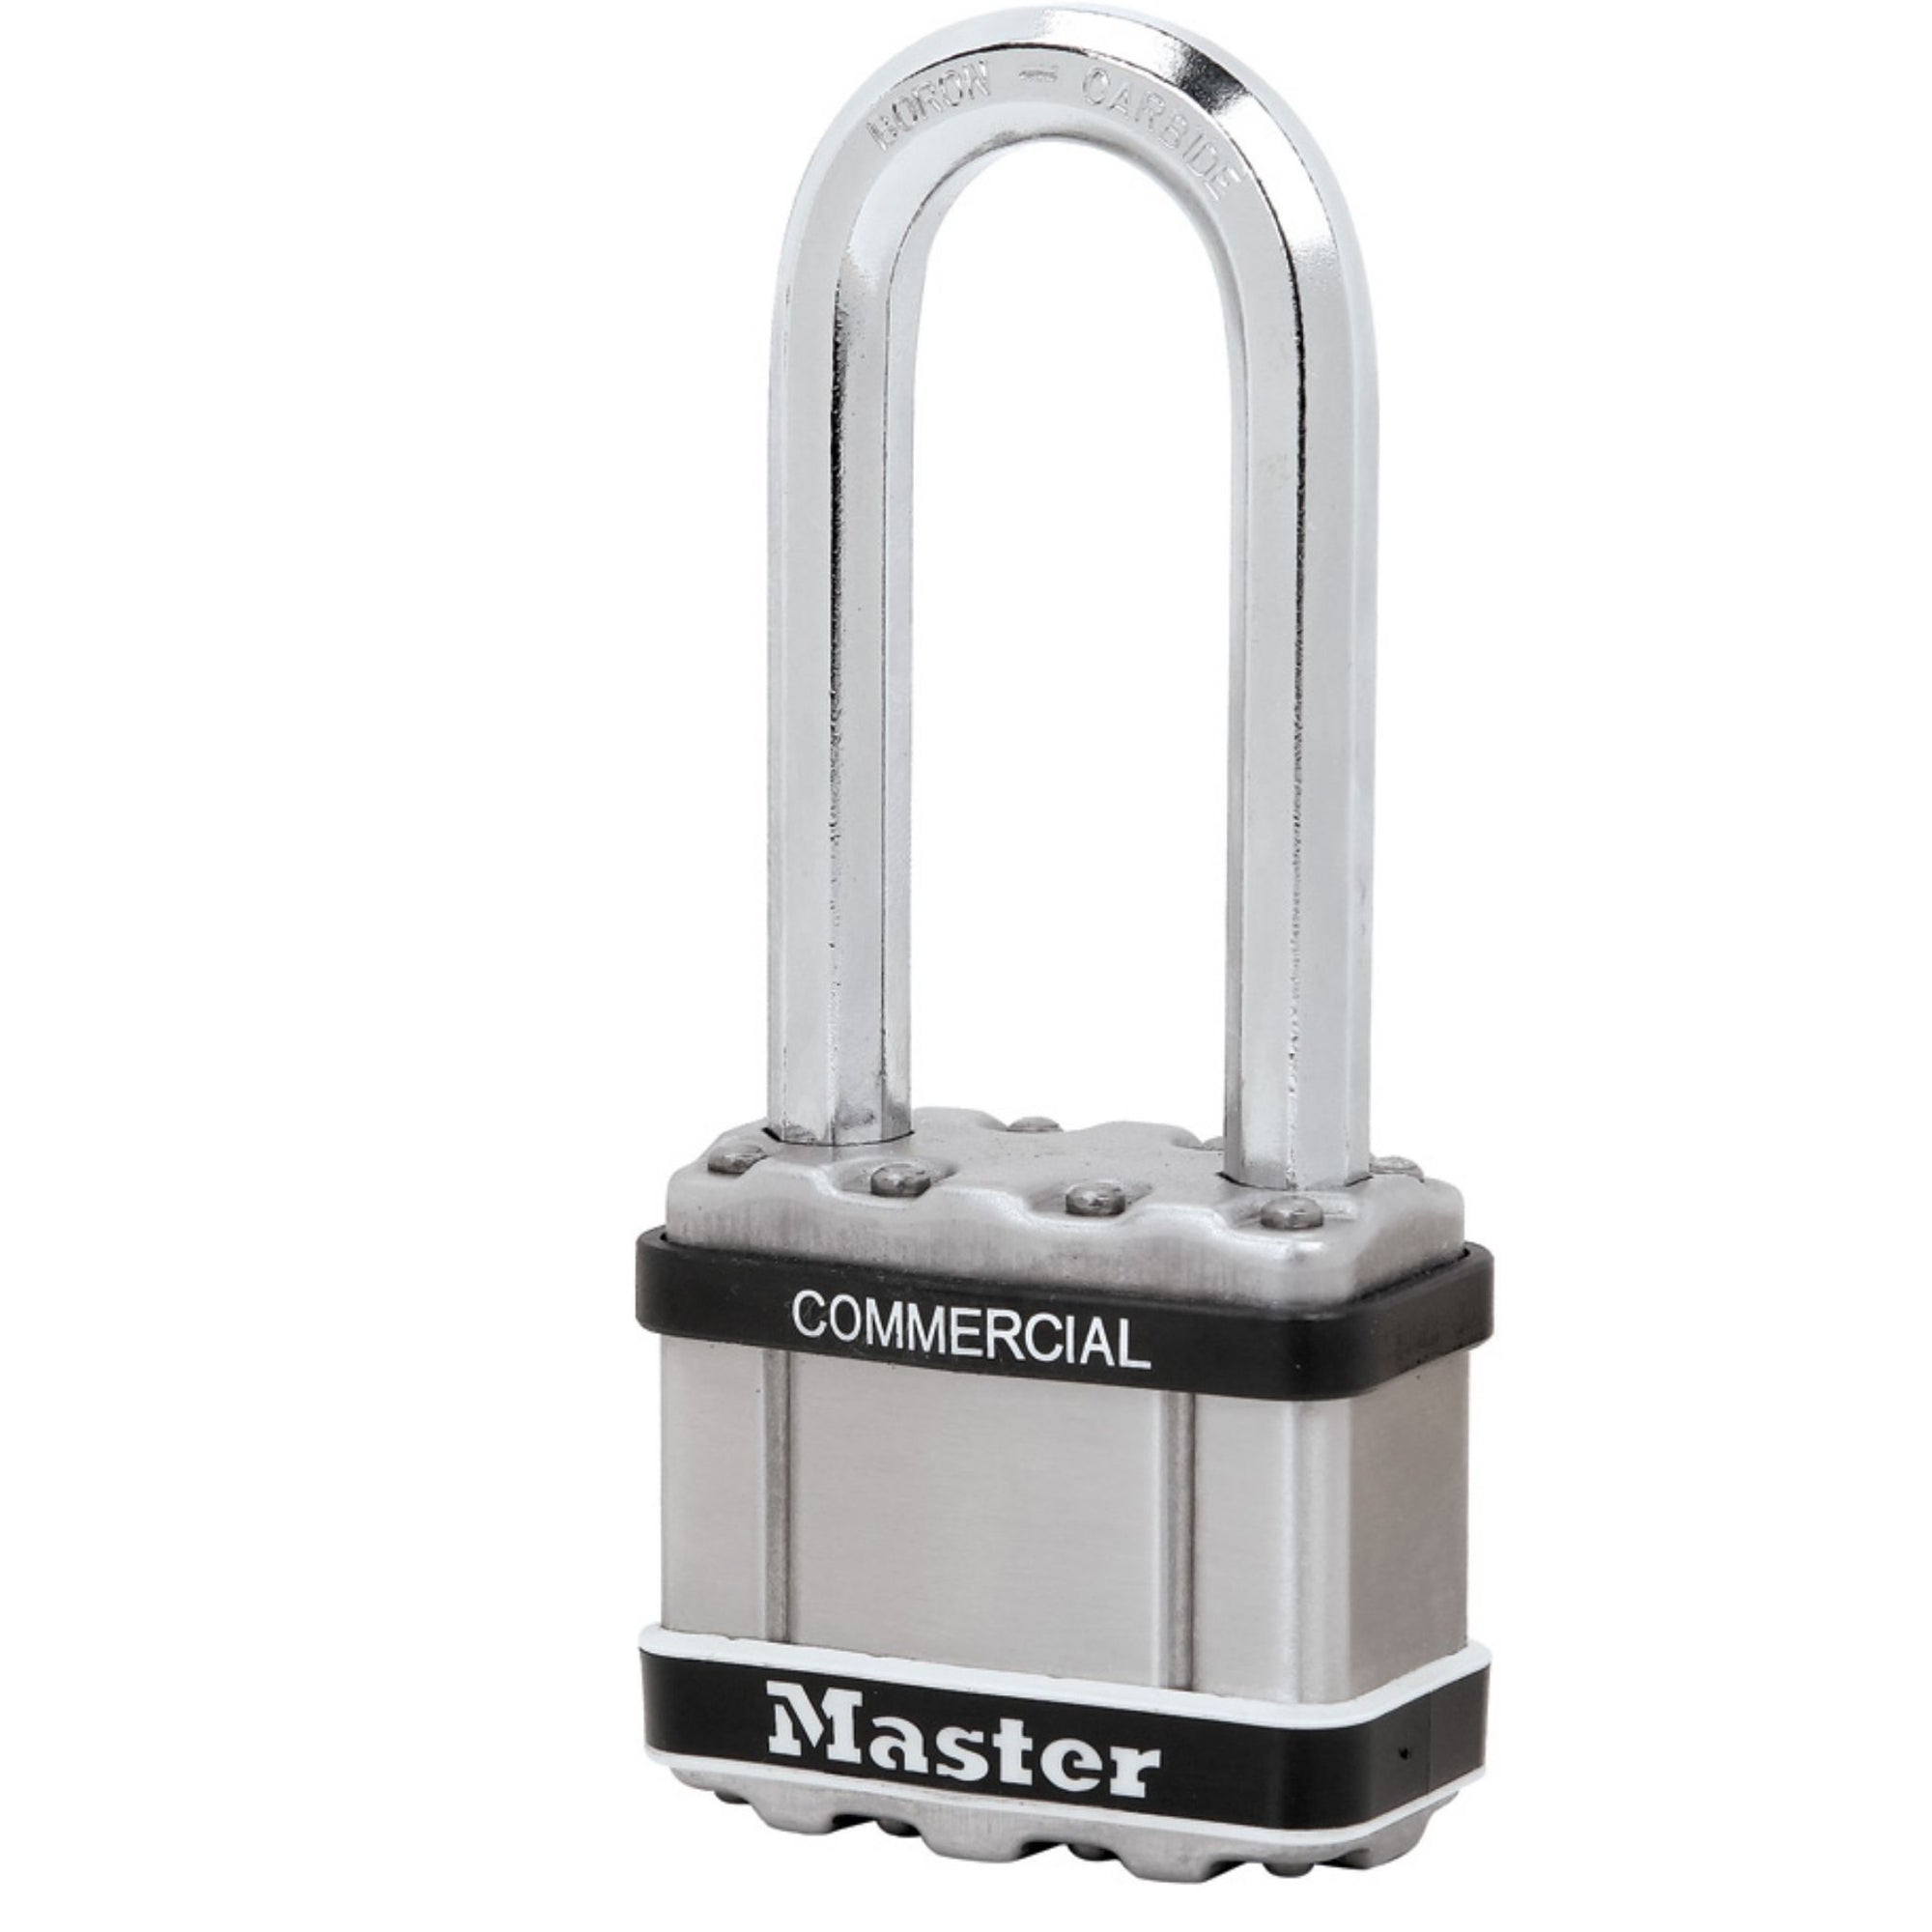 Master Lock M5 STS MKLJ Commercial Magnum Padlock with 2-1/2" Shackle - The Lock Source